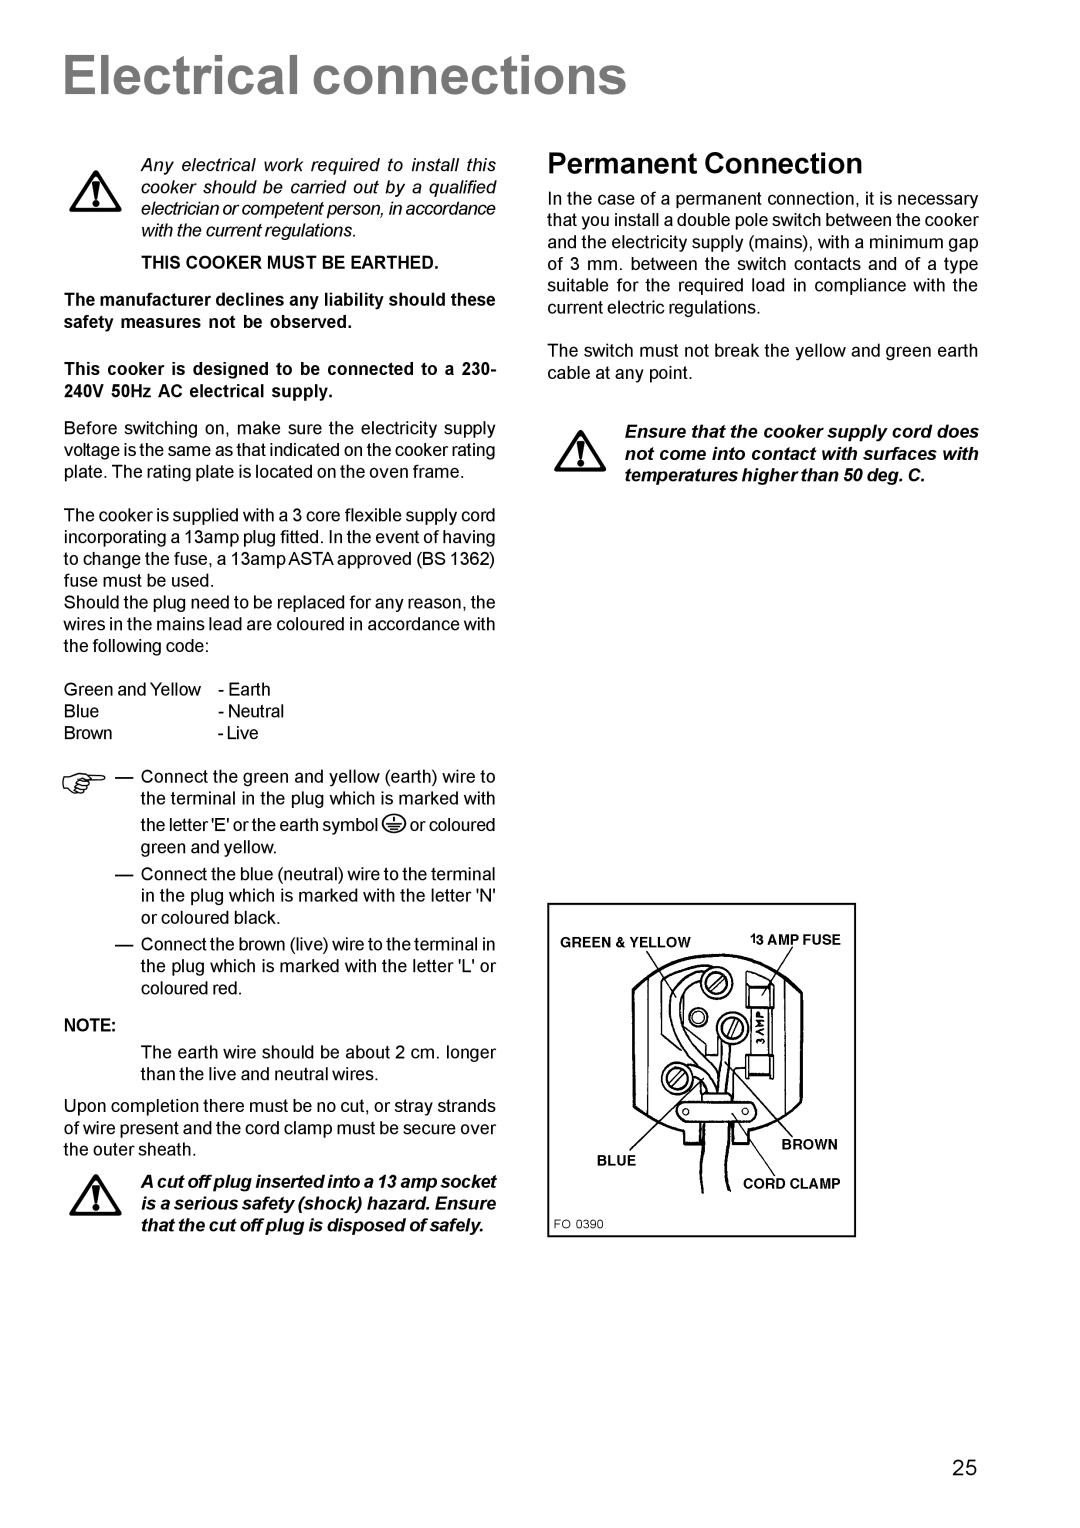 Zanussi ZCM 630 manual Electrical connections, Permanent Connection, This Cooker Must be Earthed 